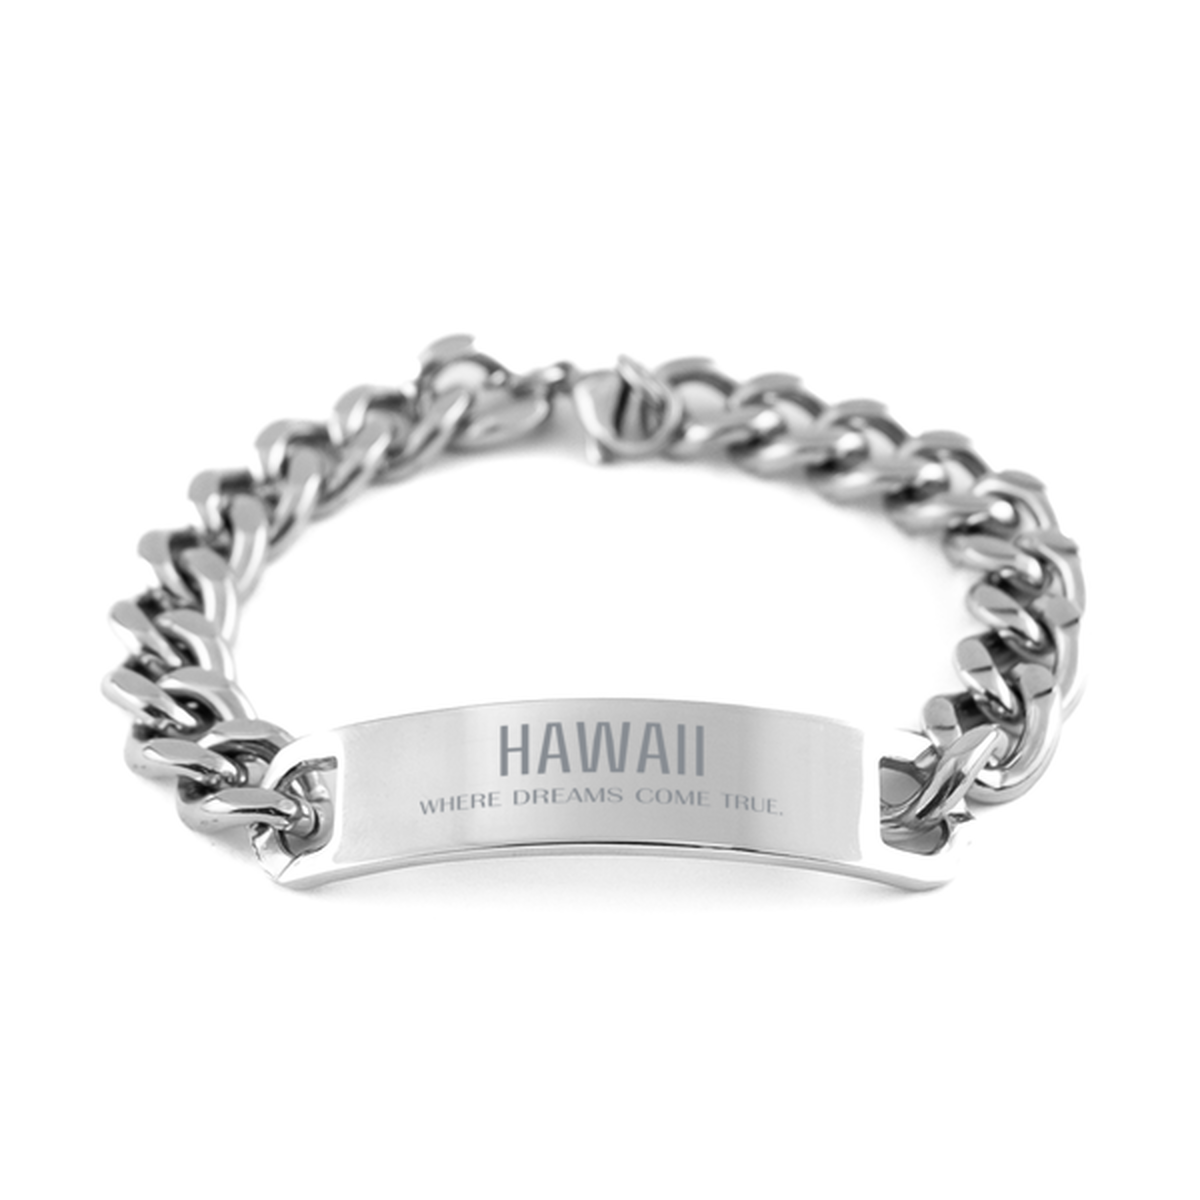 Love Hawaii State Cuban Chain Stainless Steel Bracelet, Hawaii Where dreams come true, Birthday Inspirational Gifts For Hawaii Men, Women, Friends